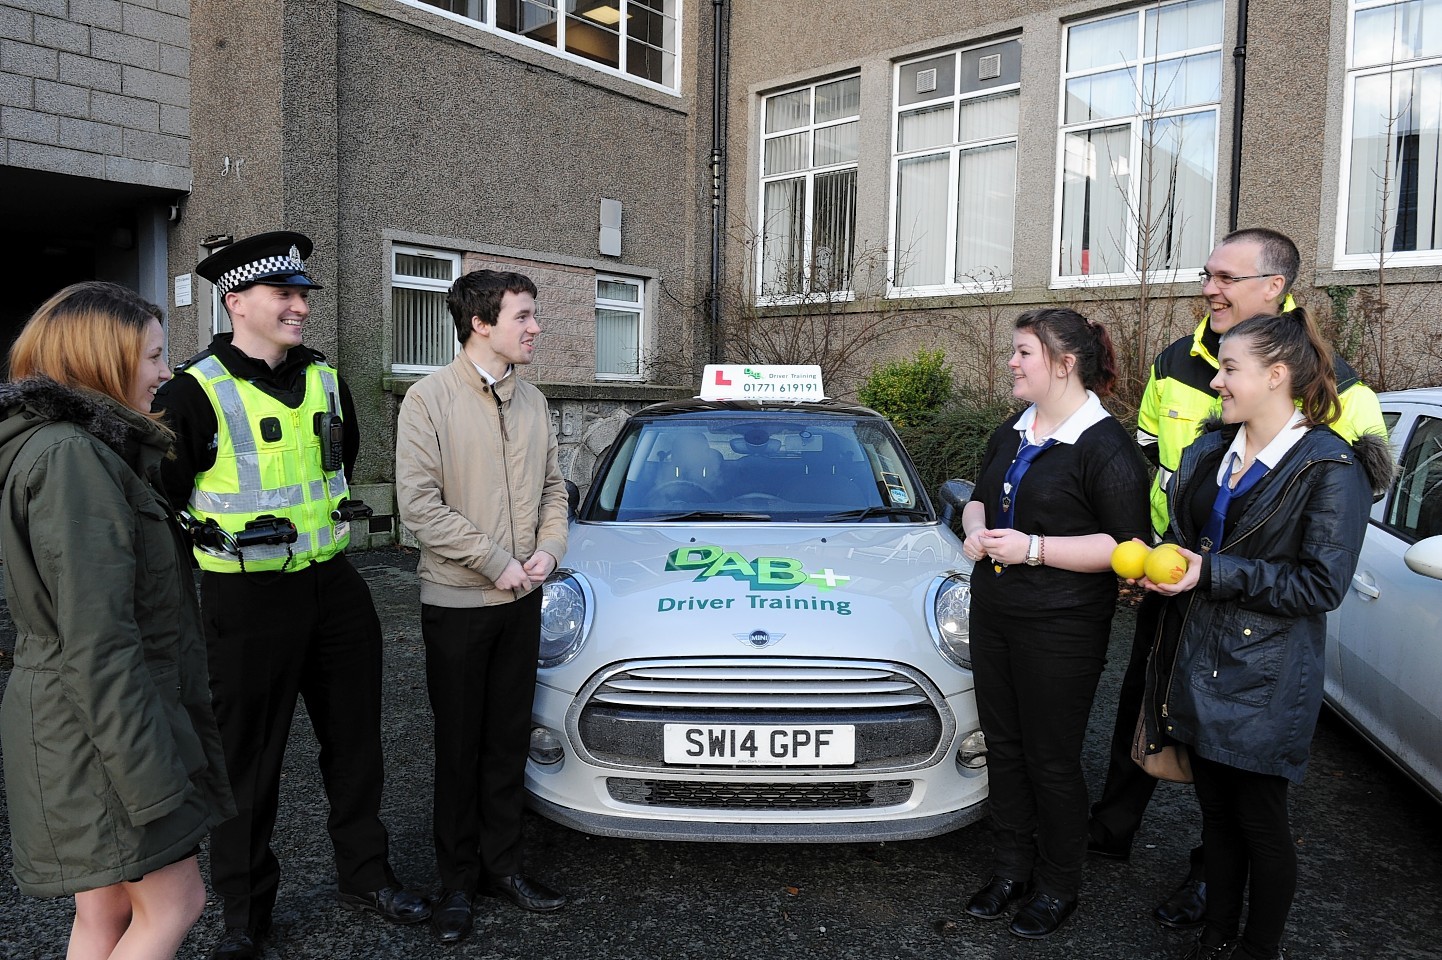 The DAB Plus Driver Training road safety event at Ellon Academy will continue today